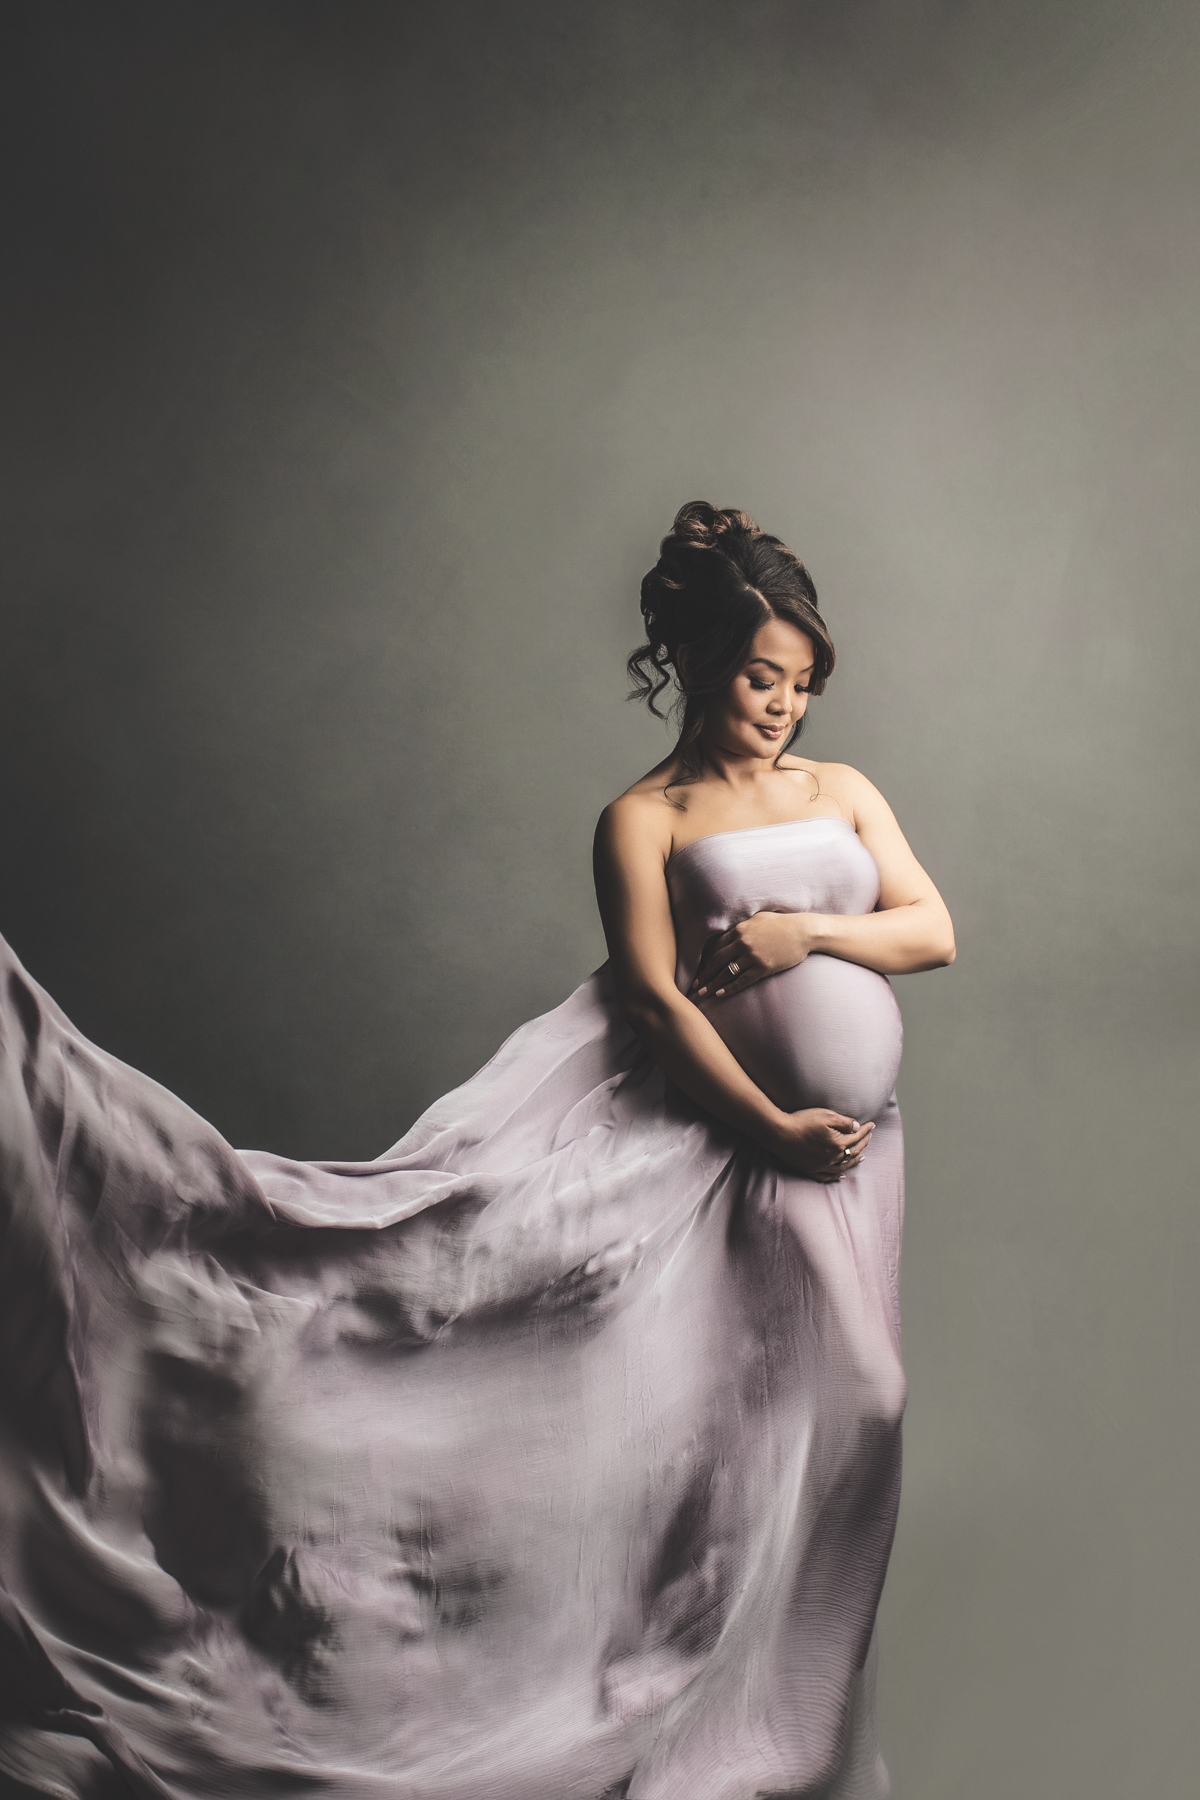 Silk fabric draping for maternity photography session in the studio - fineart professional pregnancy photoshoot